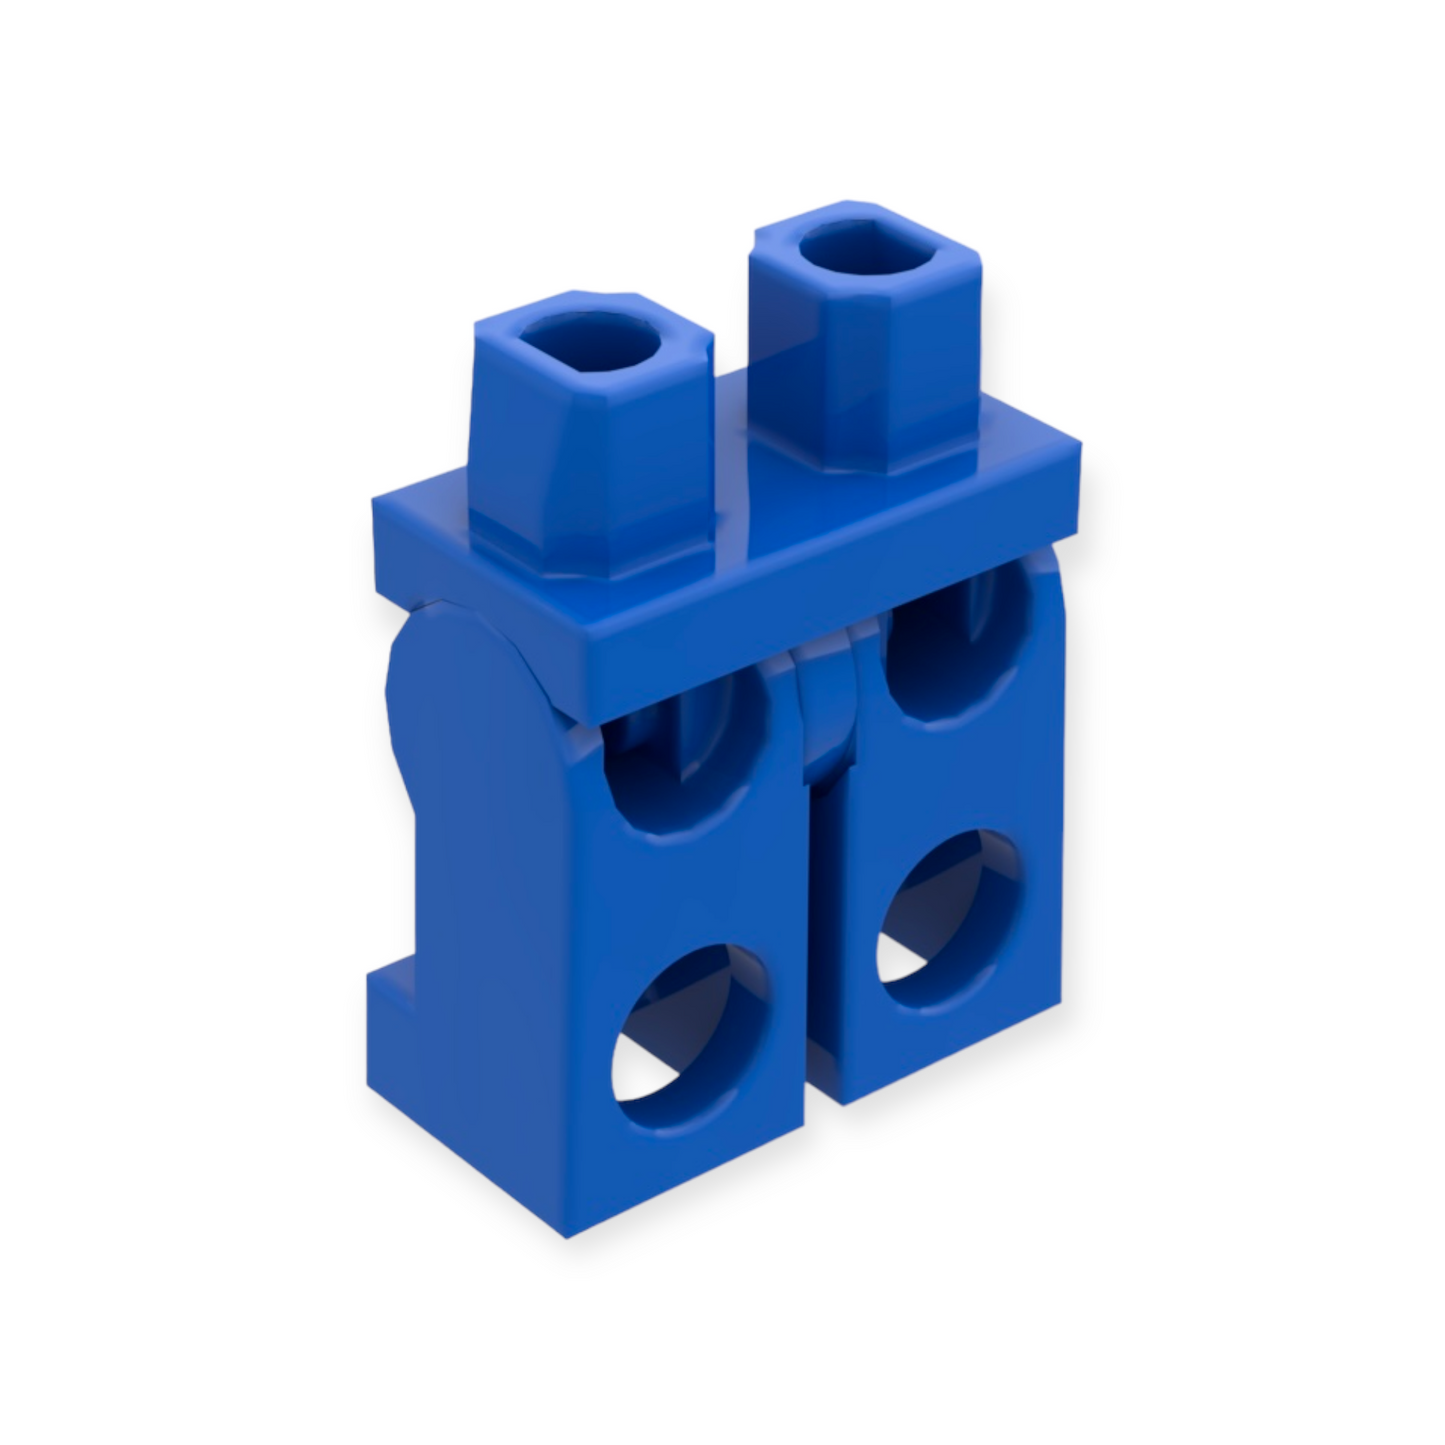 LEGO Hips and Legs - Blue